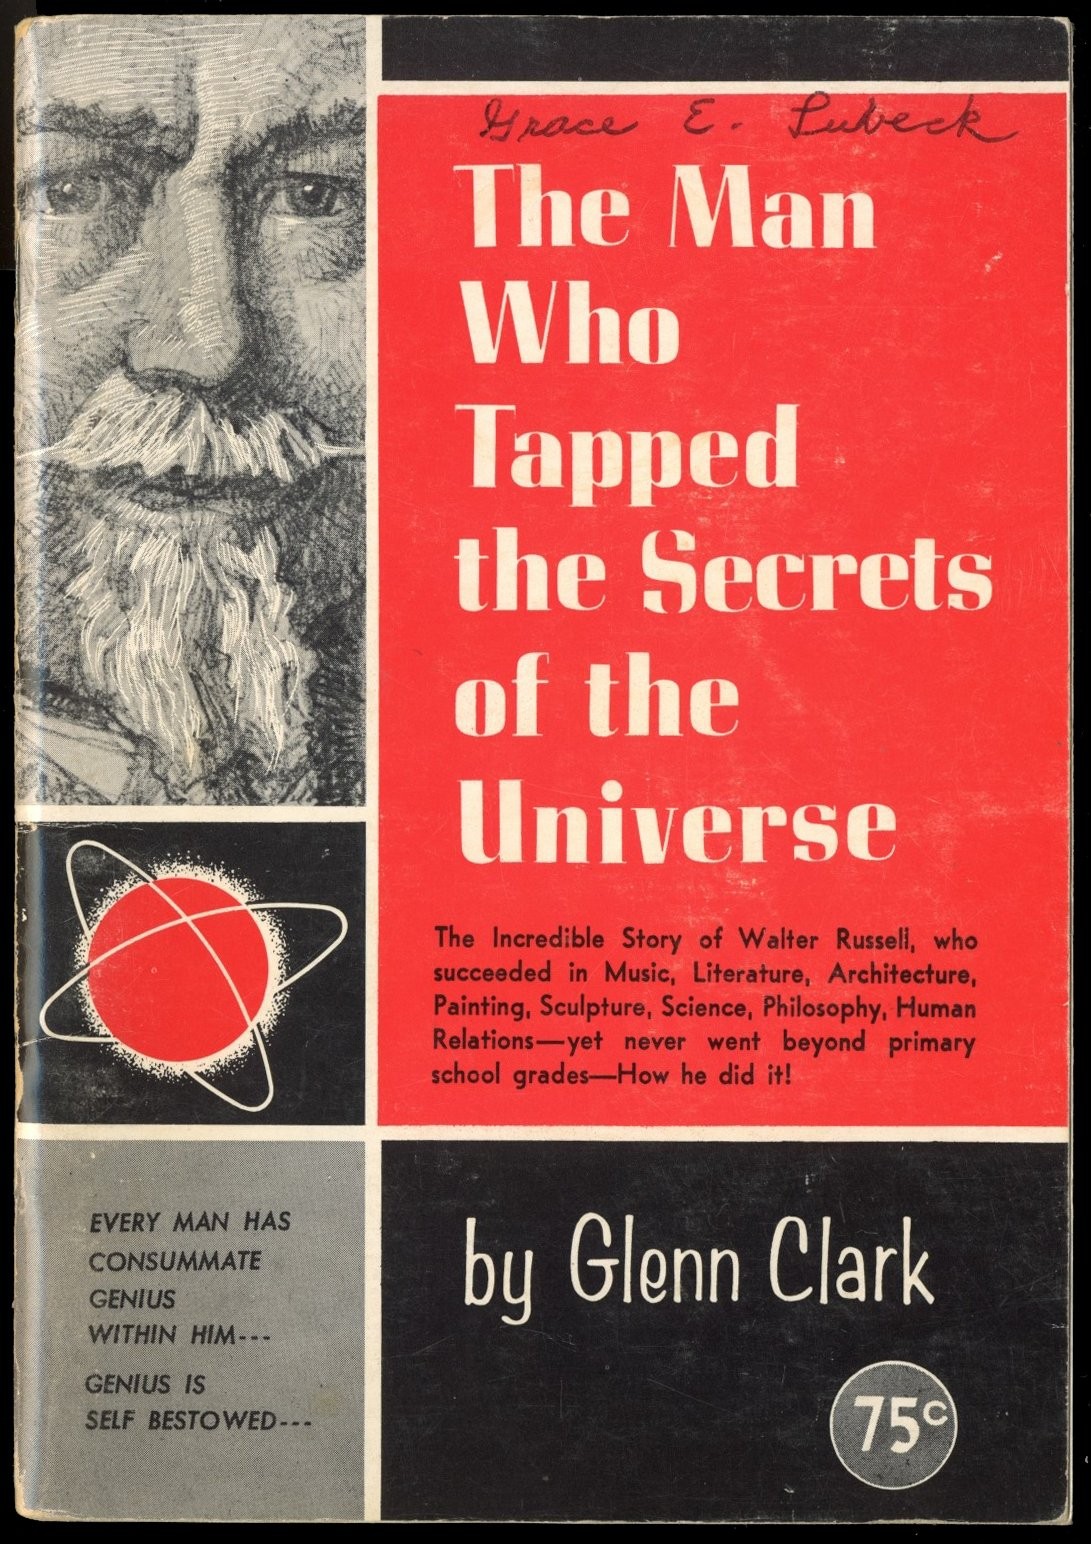 The Man Who Tapped the Secrets of the Universe